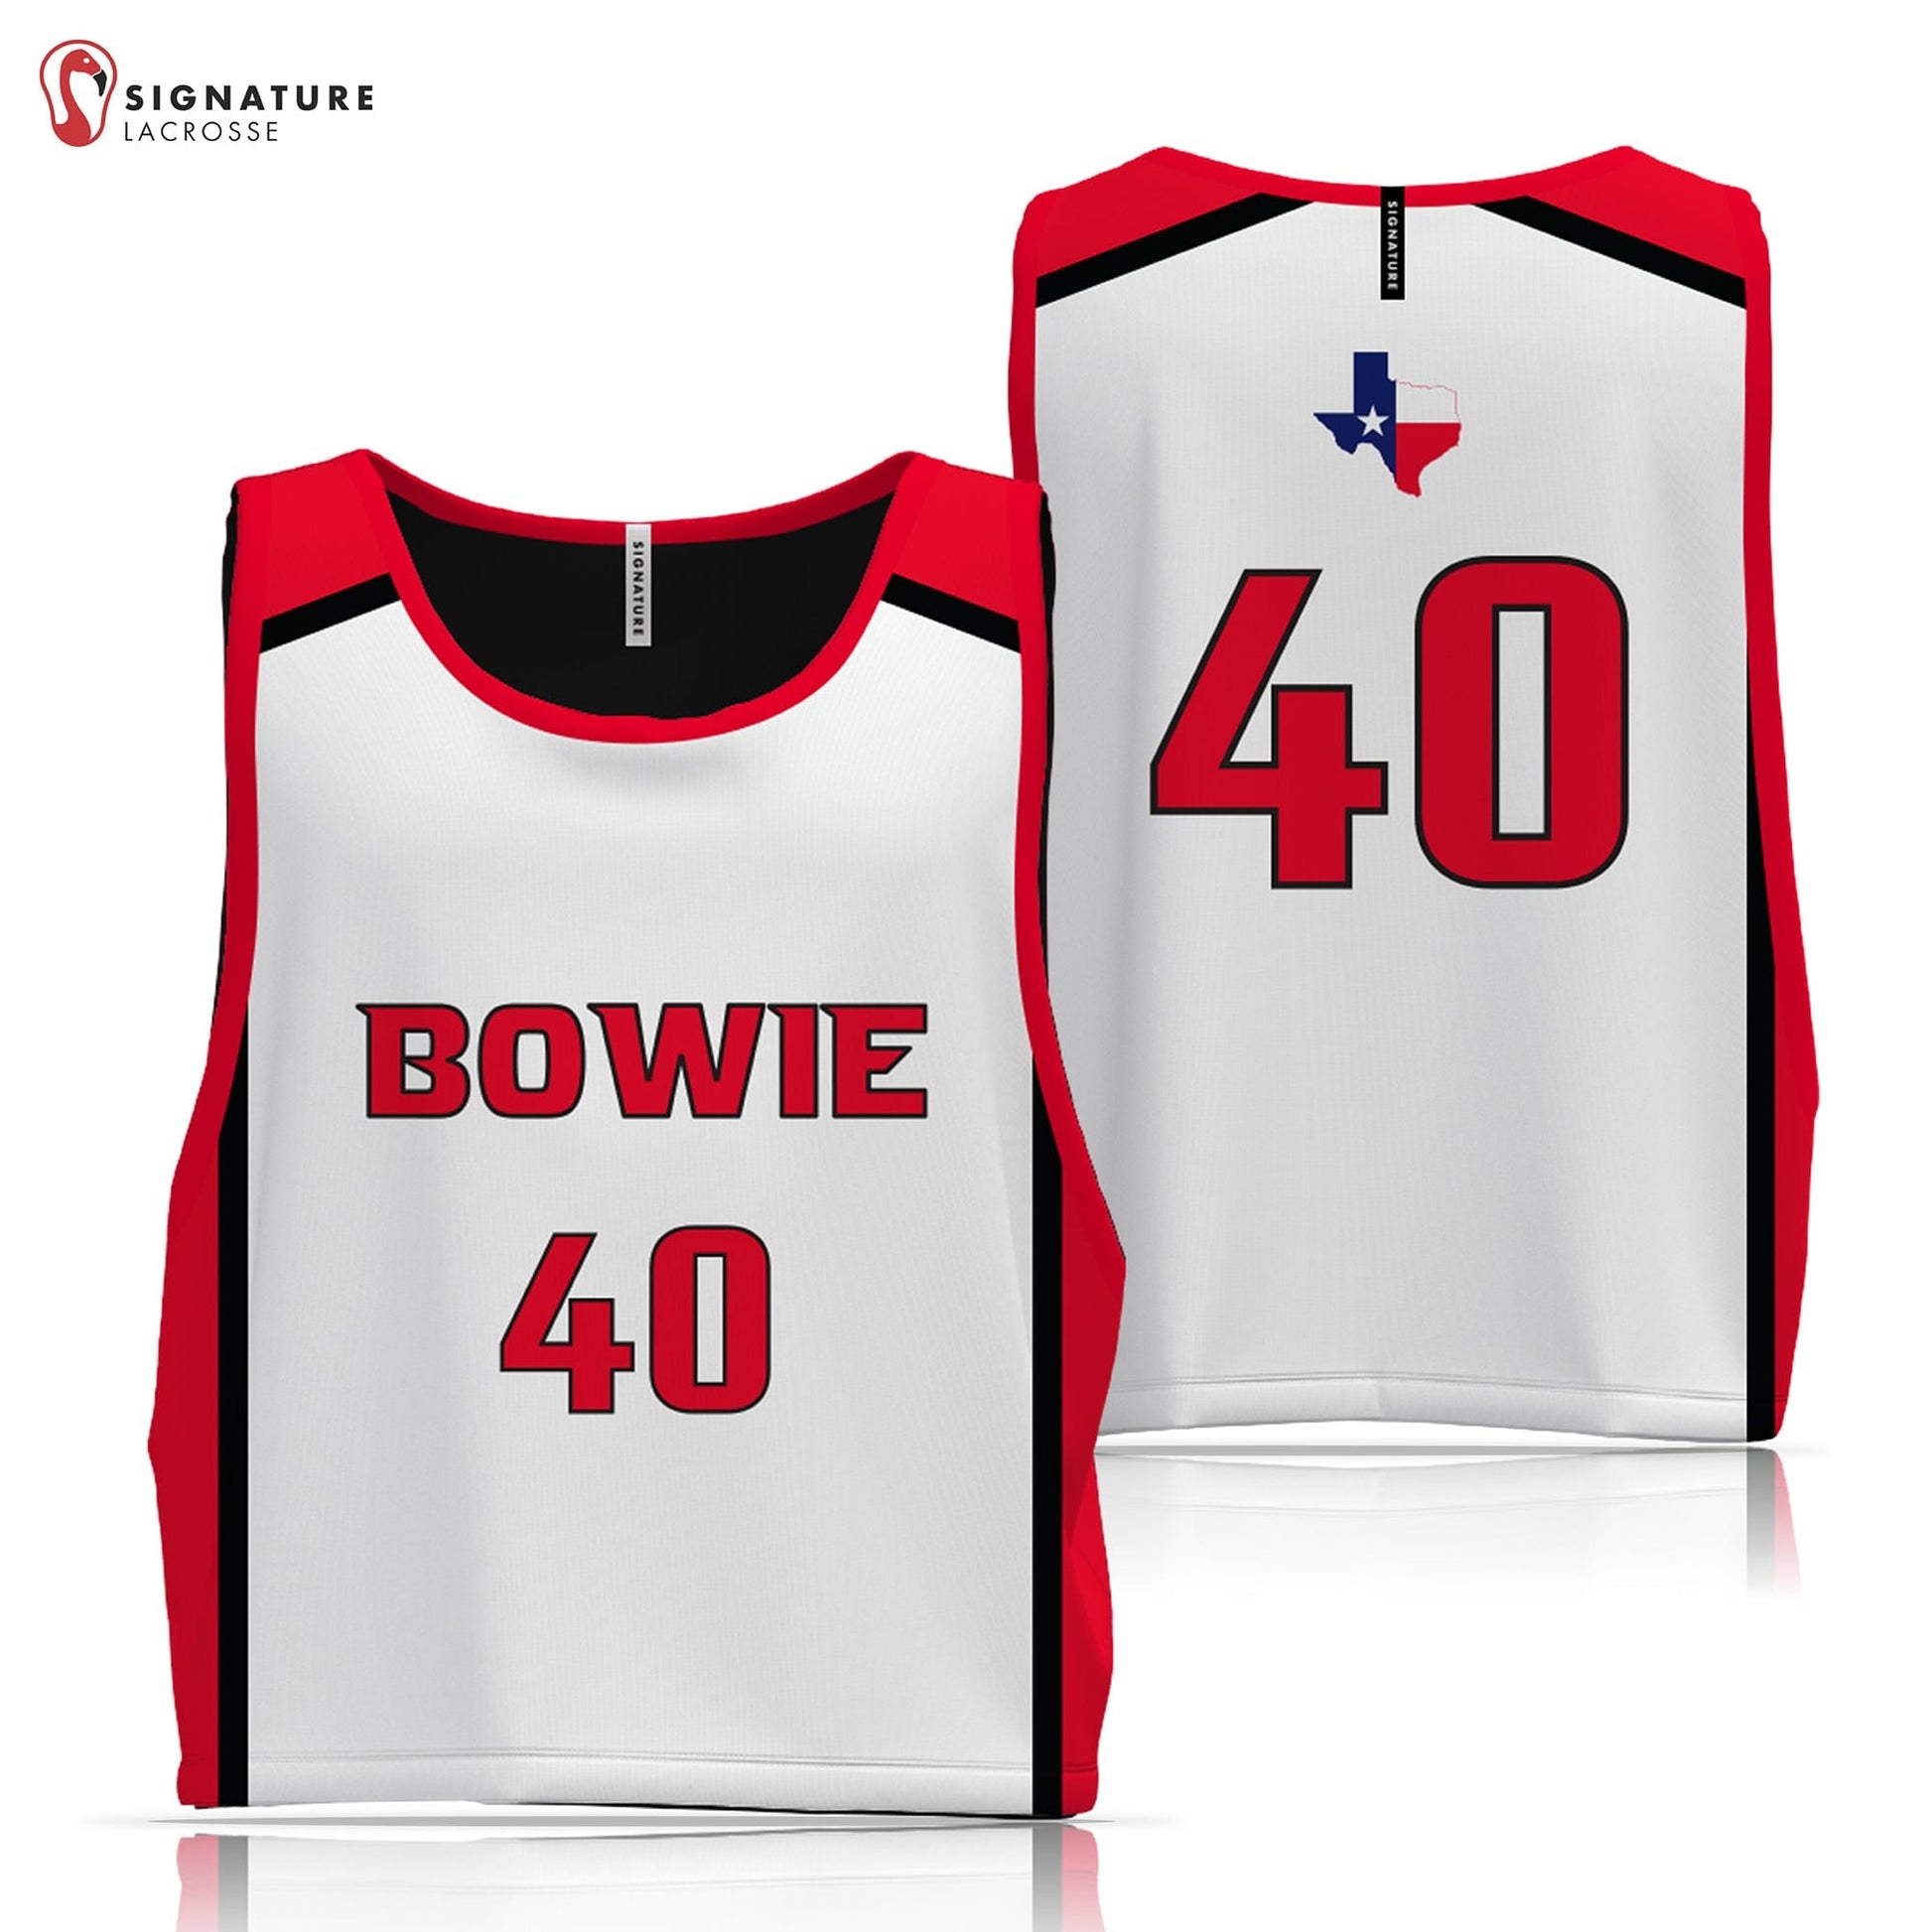 Bowie Youth Lacrosse Men's 3 Piece Game Package Signature Lacrosse